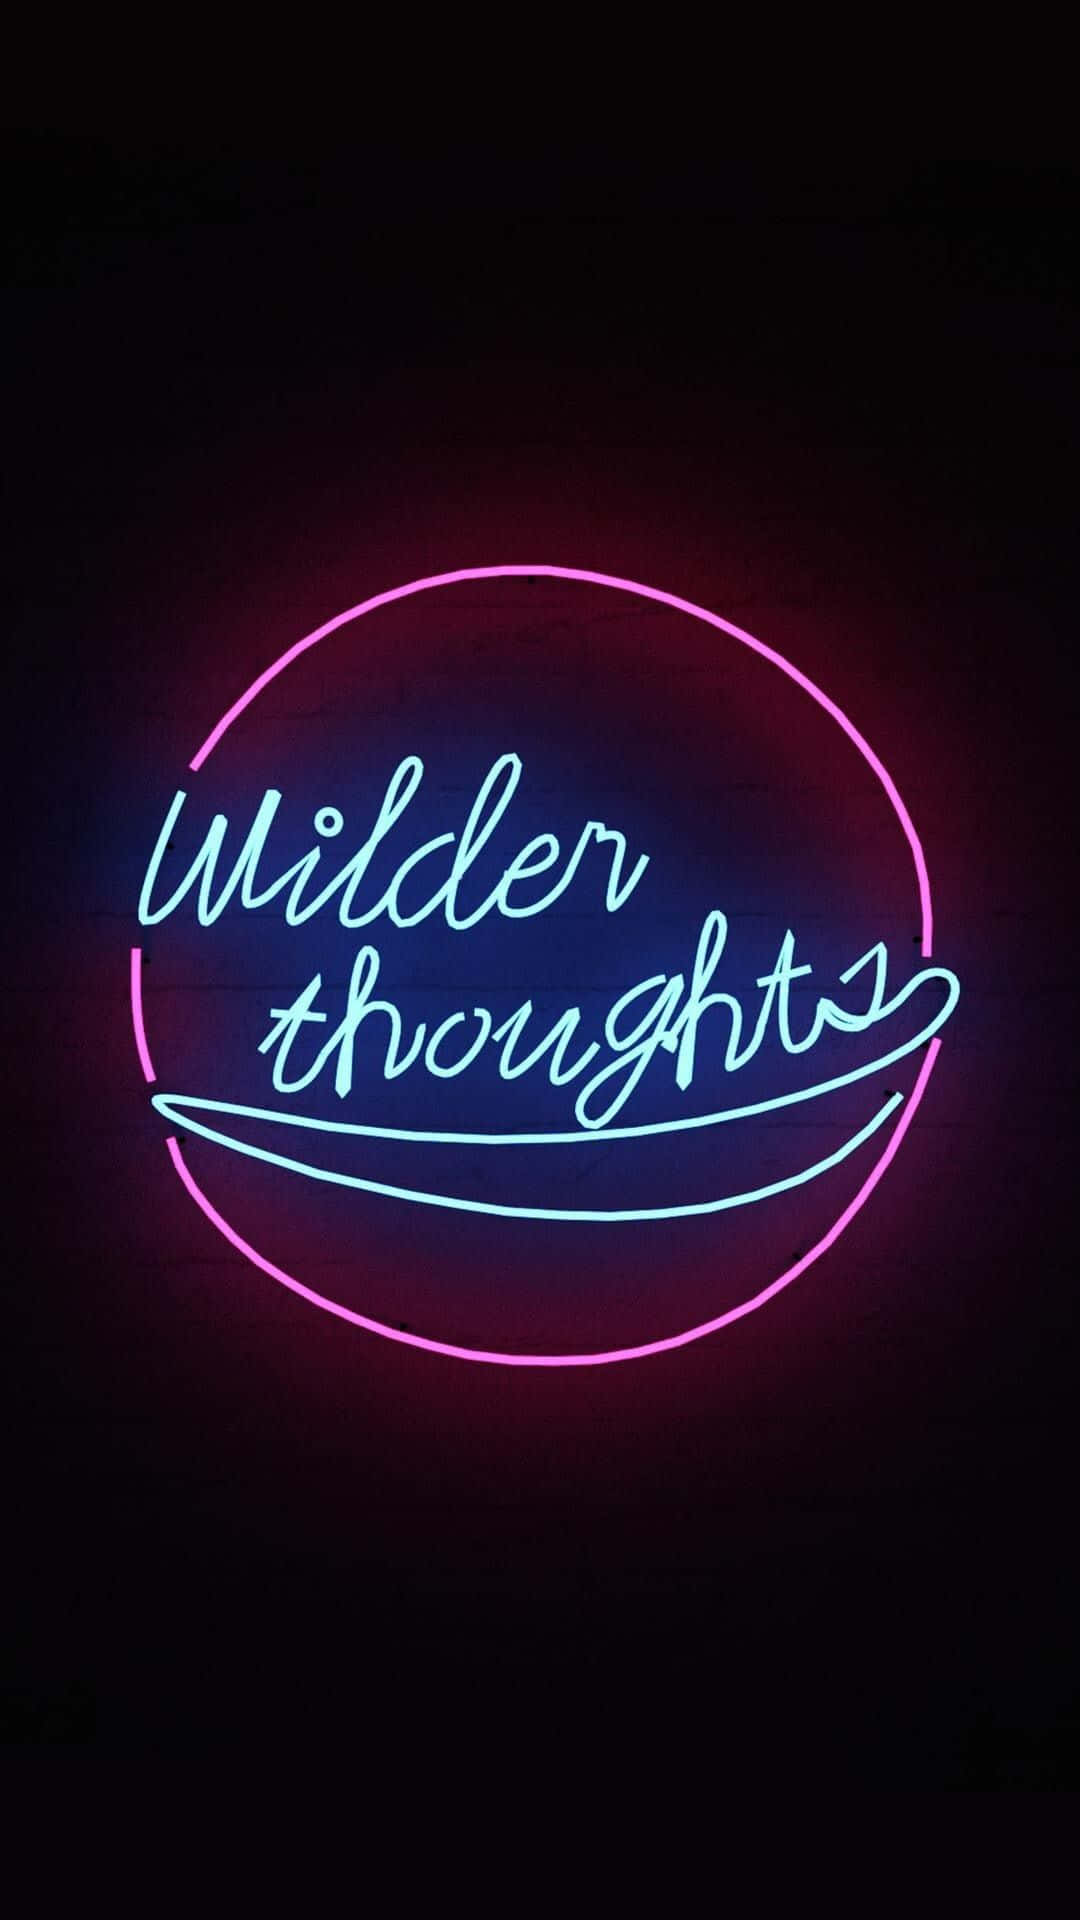 "Light up the world with your positive vibes" Wallpaper